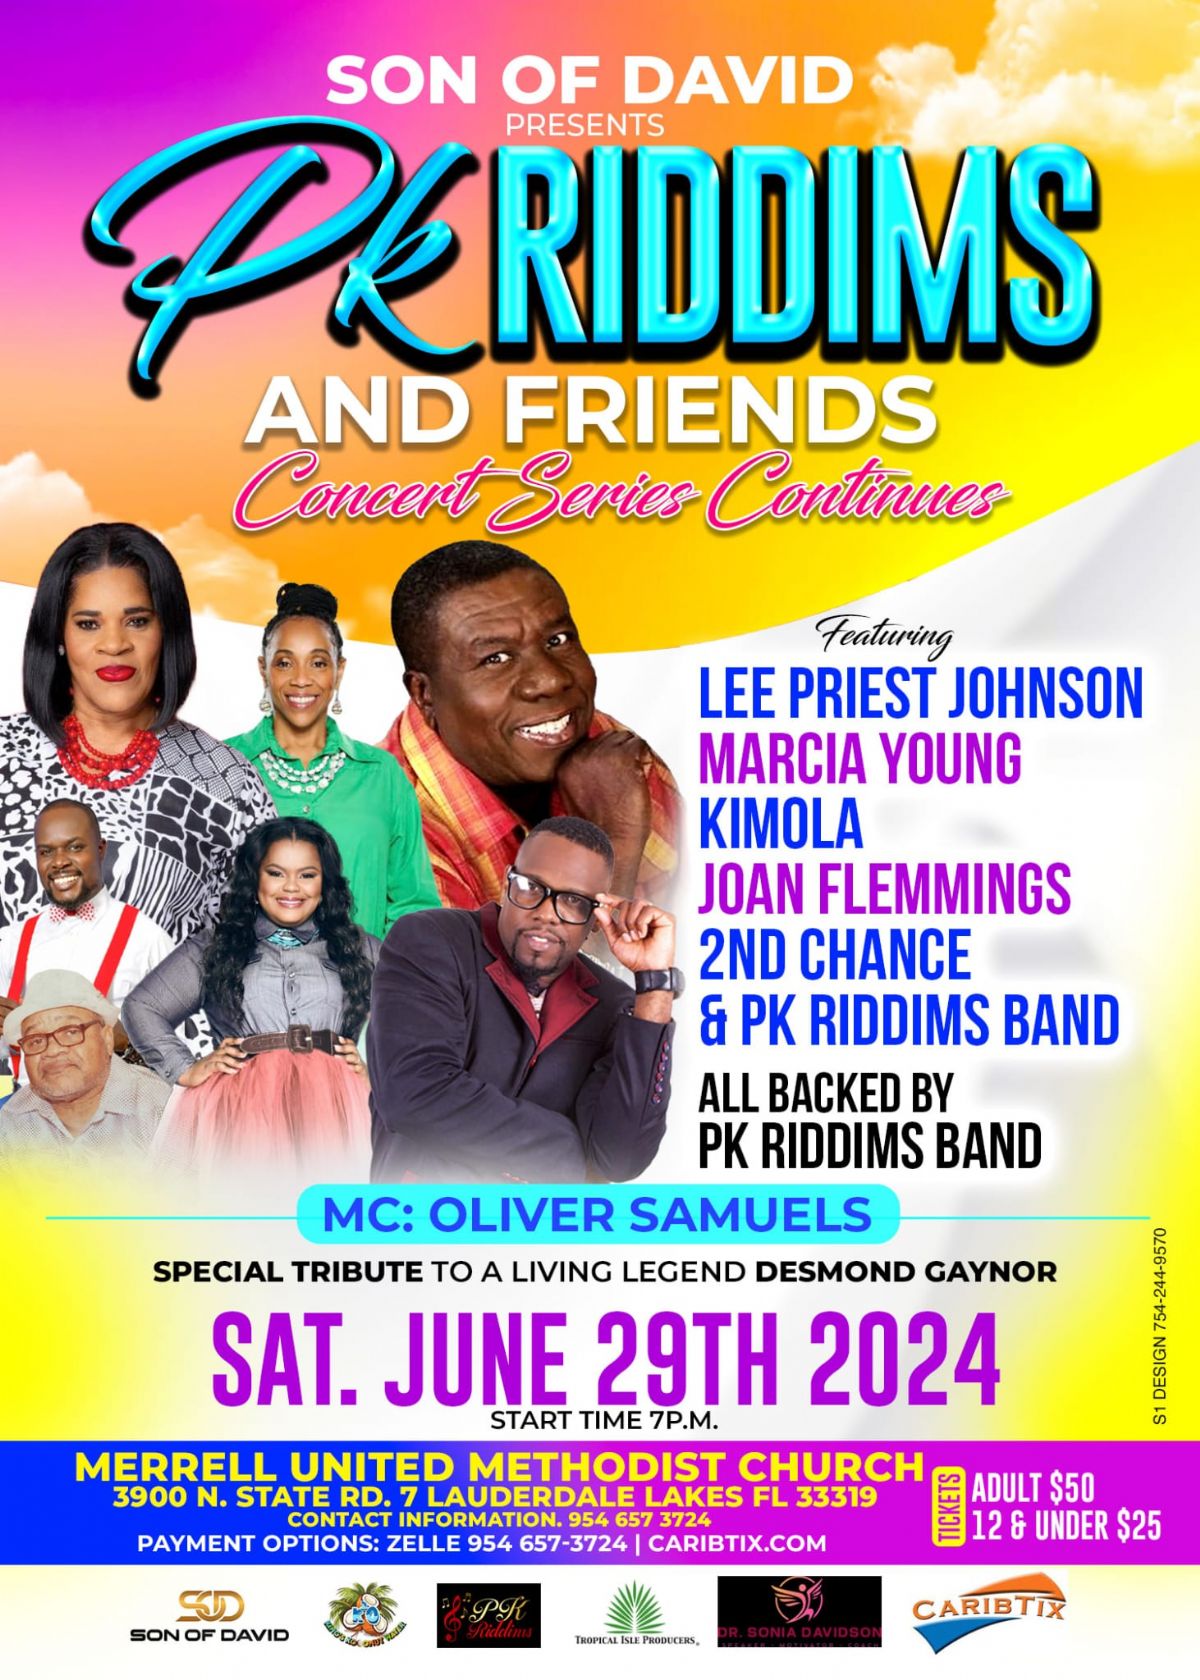 Sons of David Presents: PK Riddims & Friends Concert Series Continues Event Poster